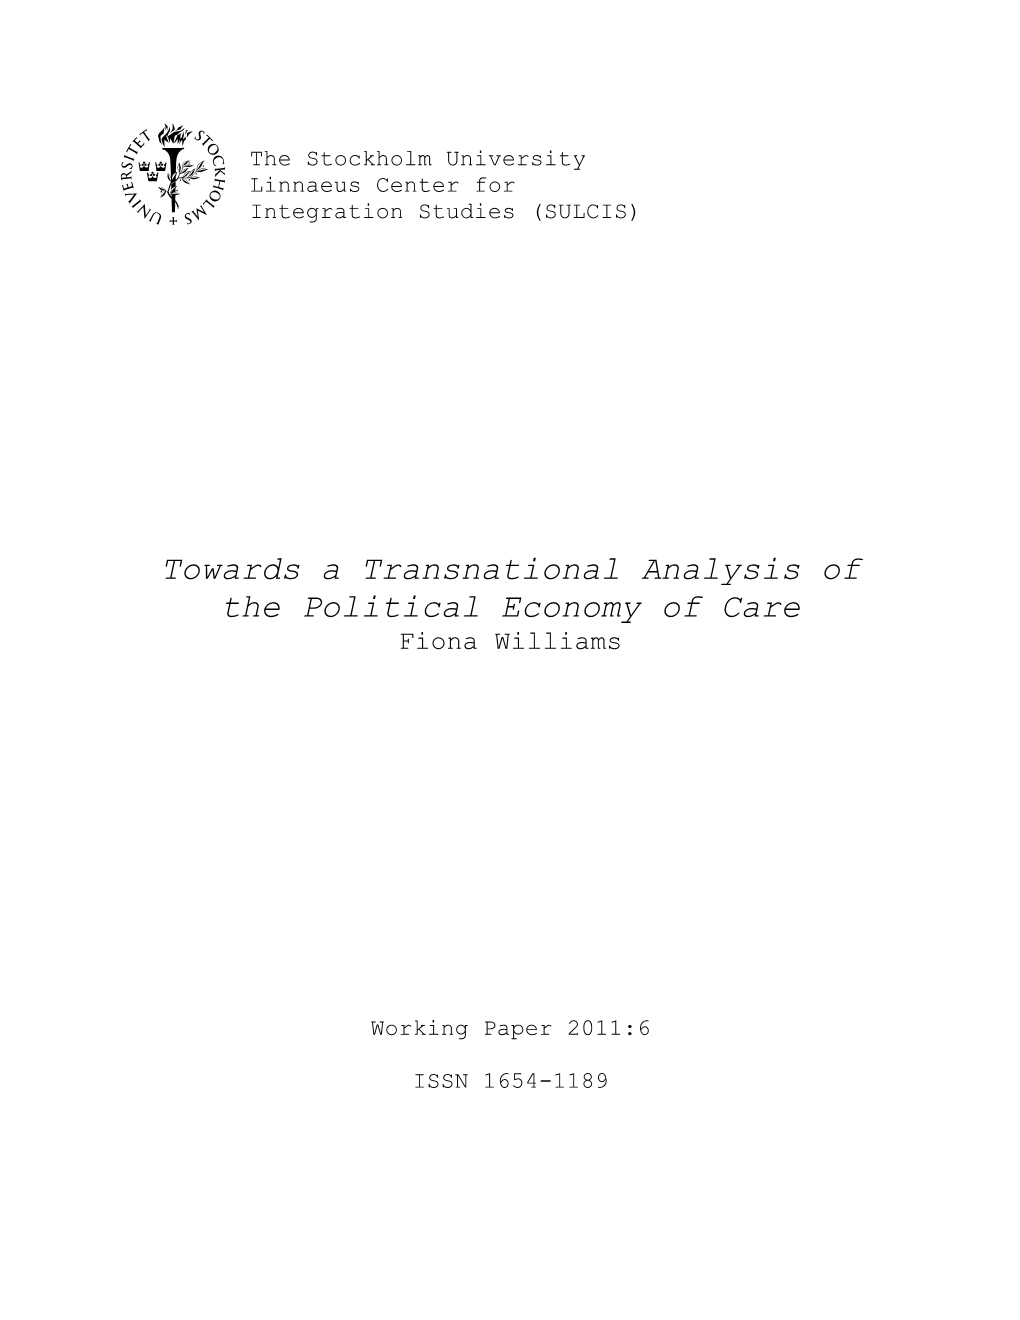 Towards a Transnational Analysis of the Political Economy of Care Fiona Williams